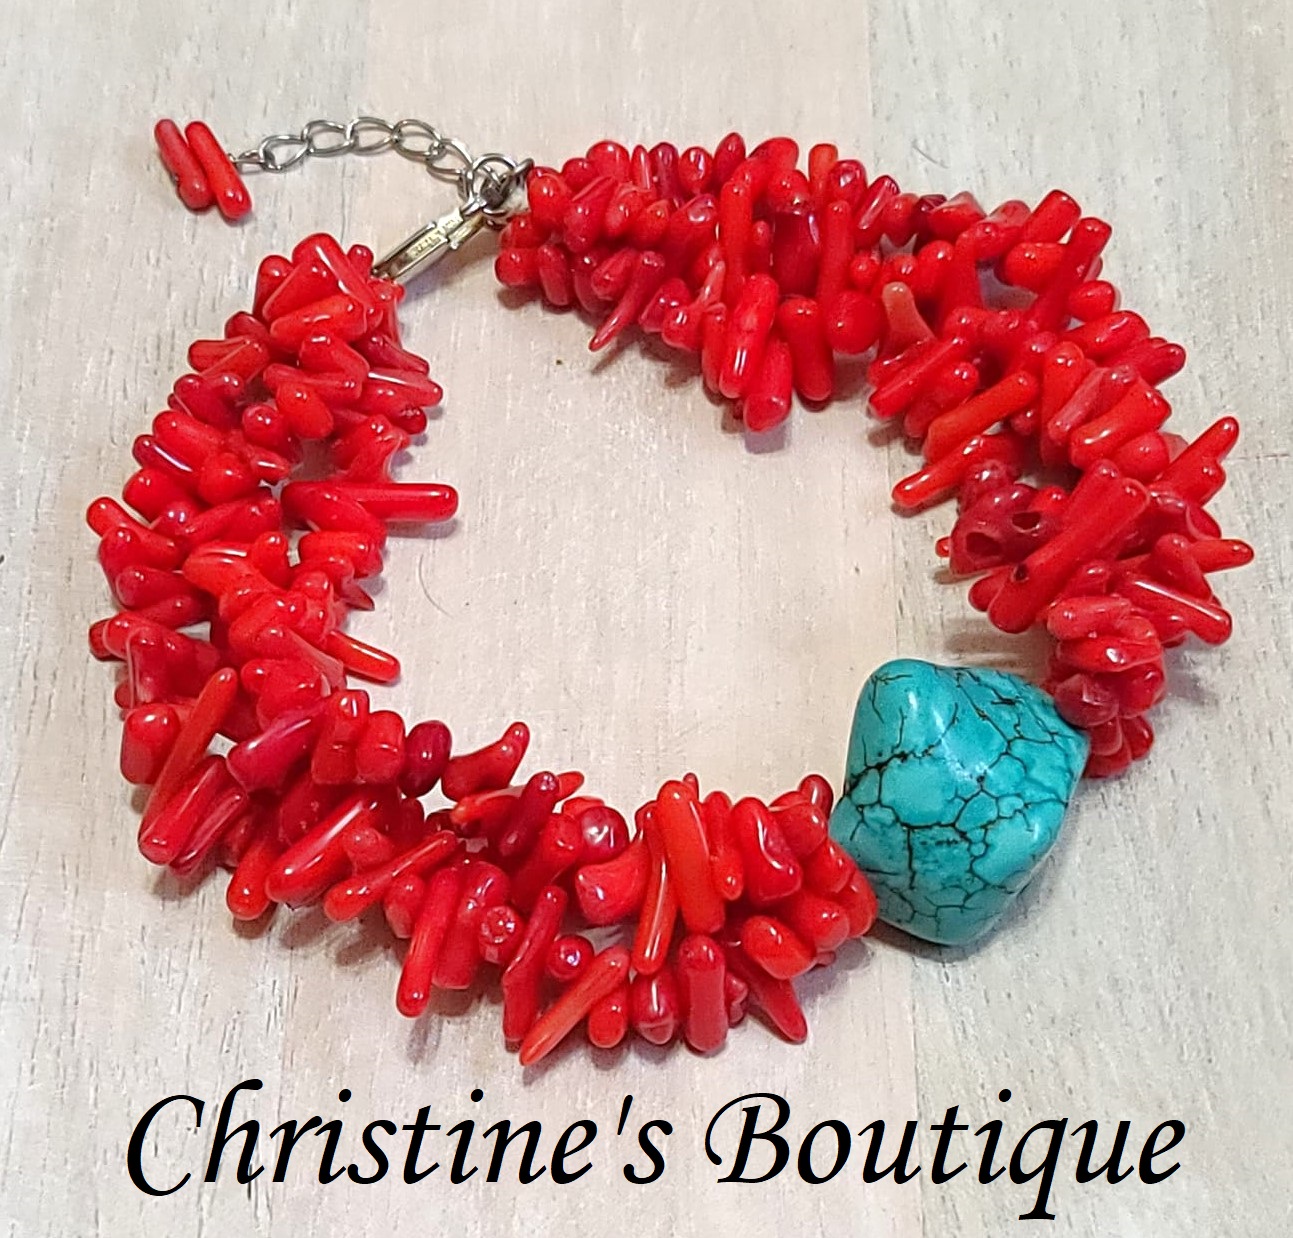 Red Branch Coral & Nugget Turquoise Gemstone Bracelet